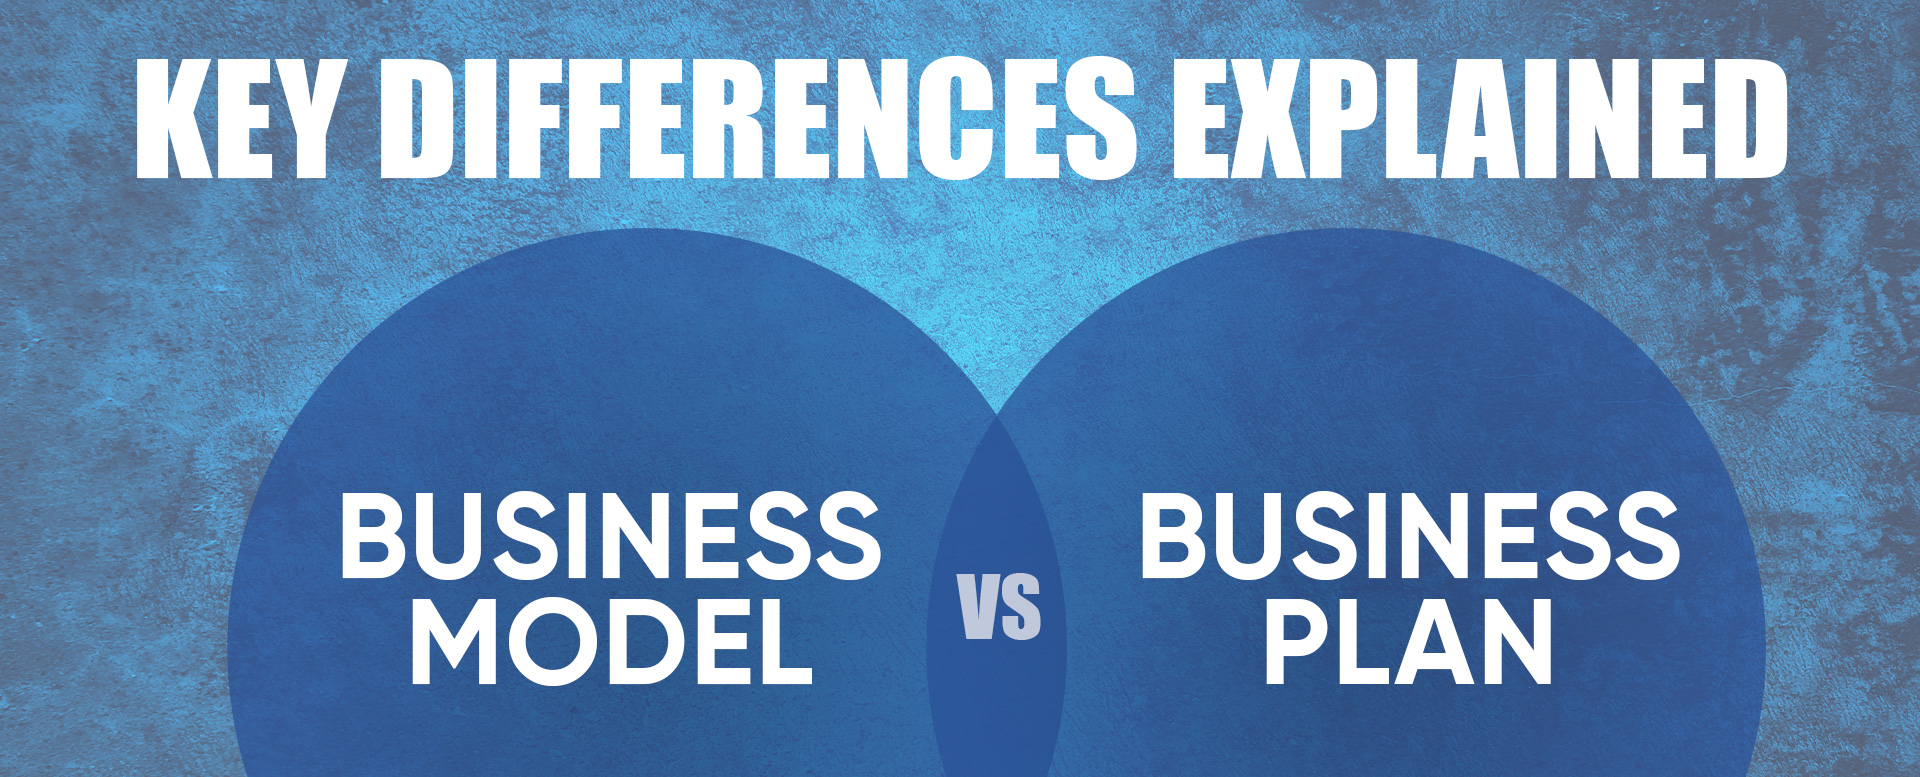 Business Model vs Business Plan: Key Differences Explained